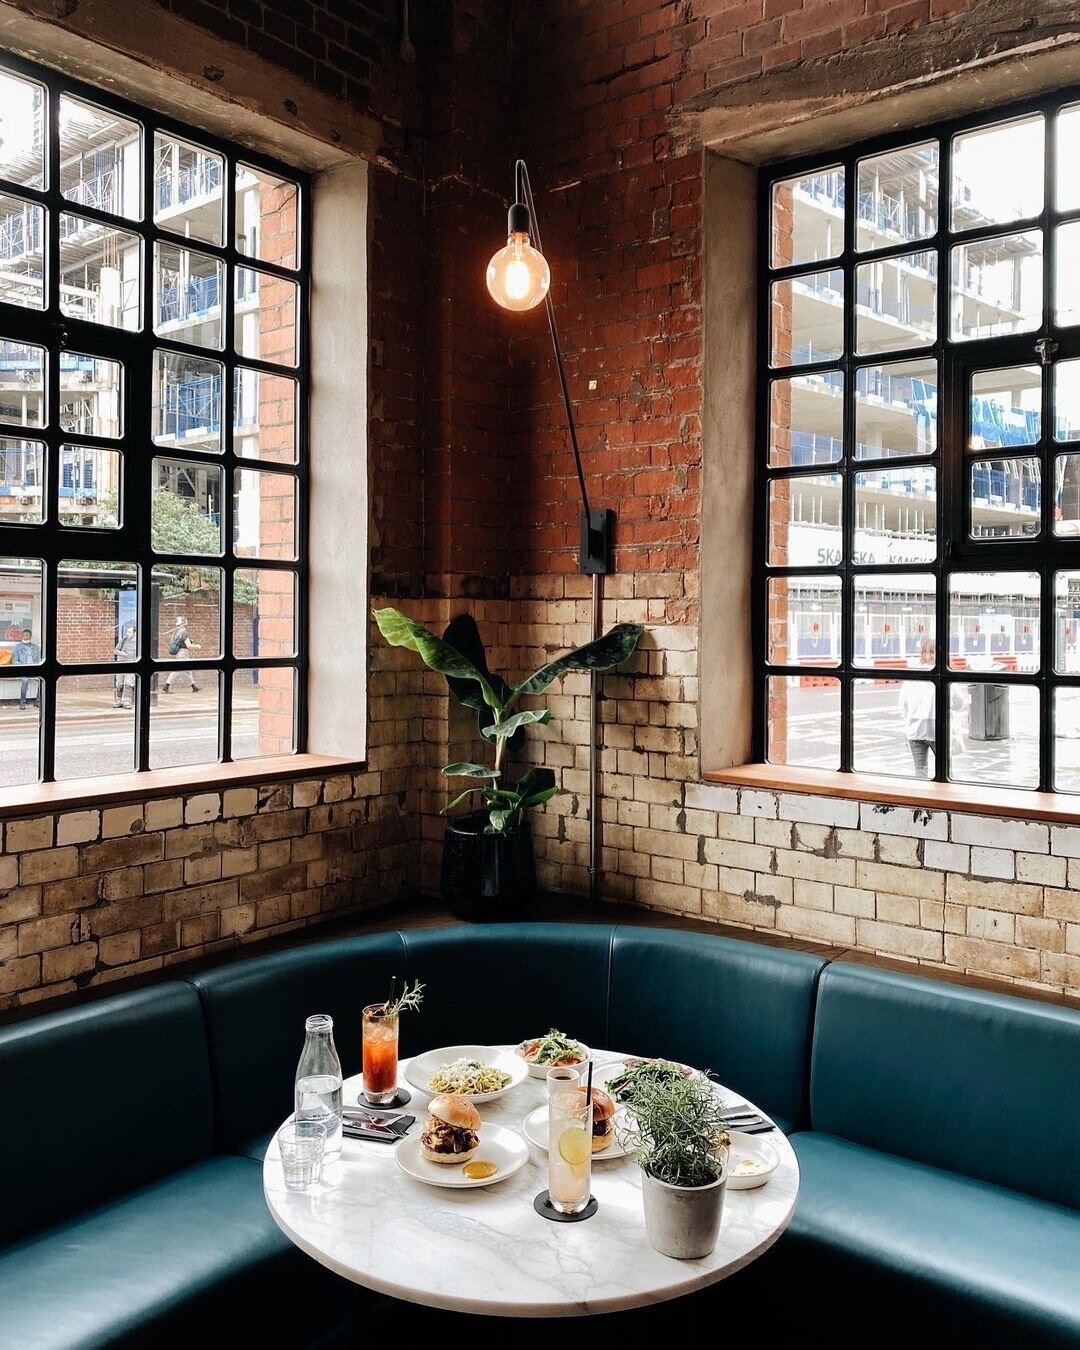 👆 #foodbloggers favourite: table 6⚡️⁠
⁠
Repost 📸 @eastlondonmornings 🙏⁠
_____
Lunch in the iconic @lightbarlondon. Located on Shoreditch High Street, the site has been a symbol of London&rsquo;s East End since it was built in 1893 to generate elec